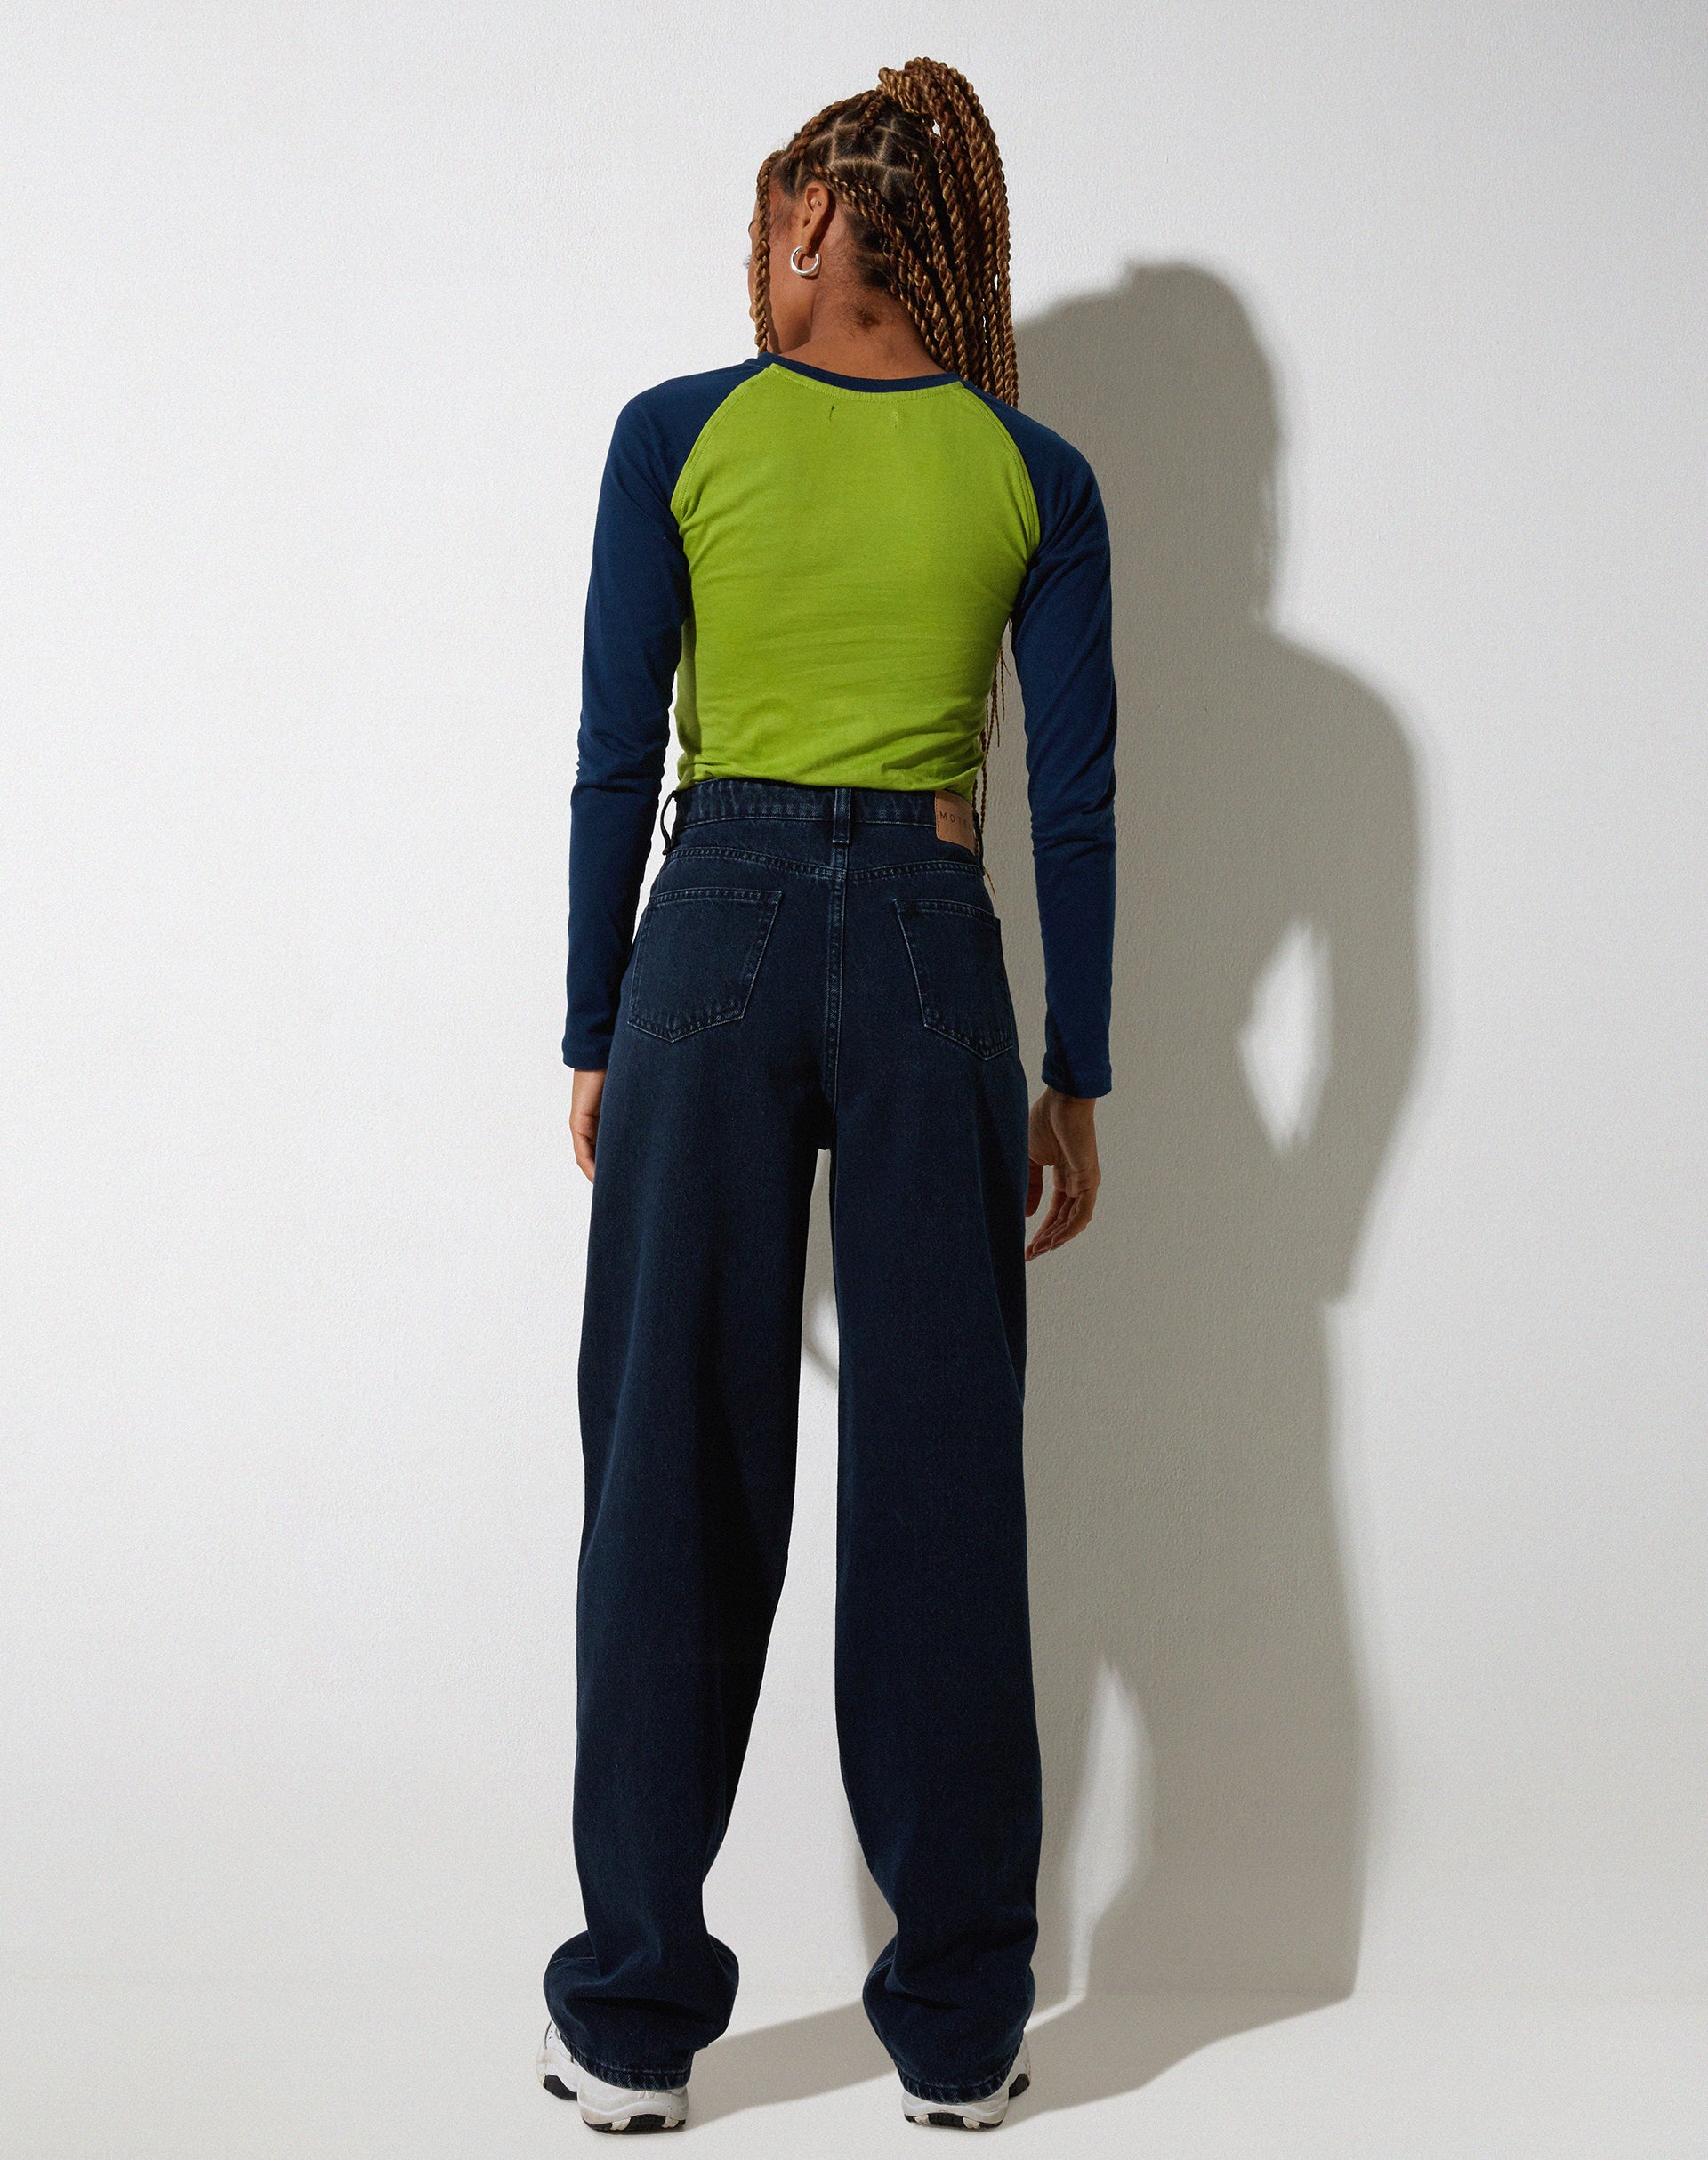 Image of Kyati Long Sleeve Crop Top in Wasabi Navy and Green